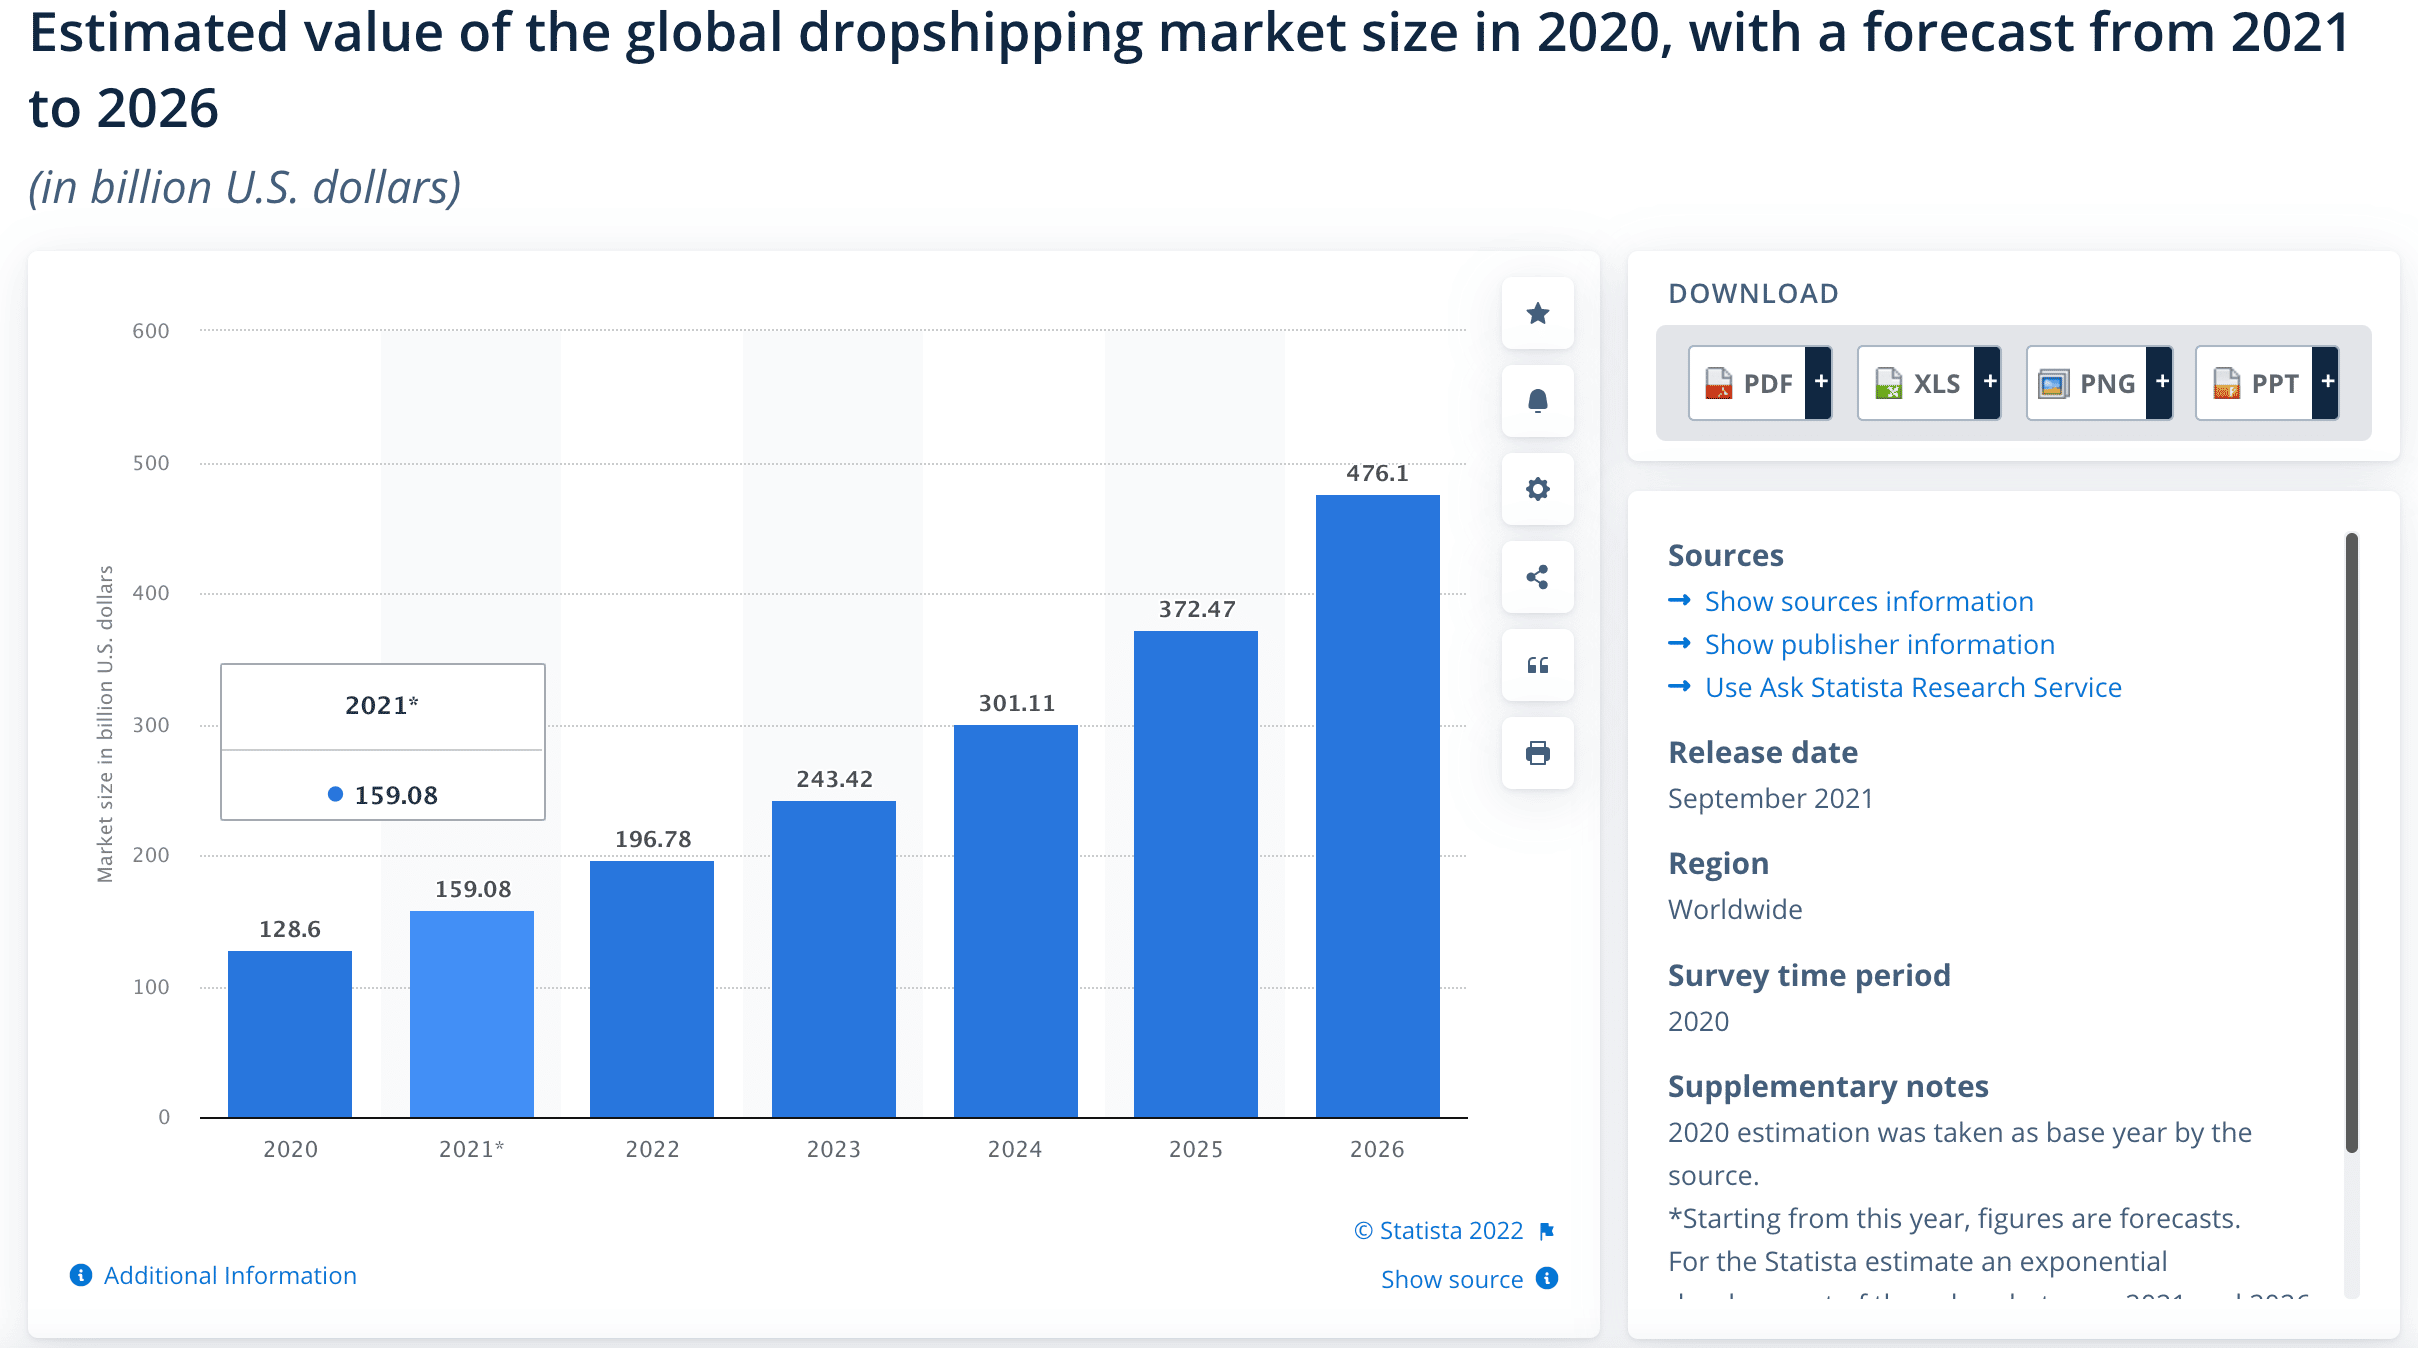 Estimated value of the global dropshipping market size in 2020, with a forecast from 2021 to 2026